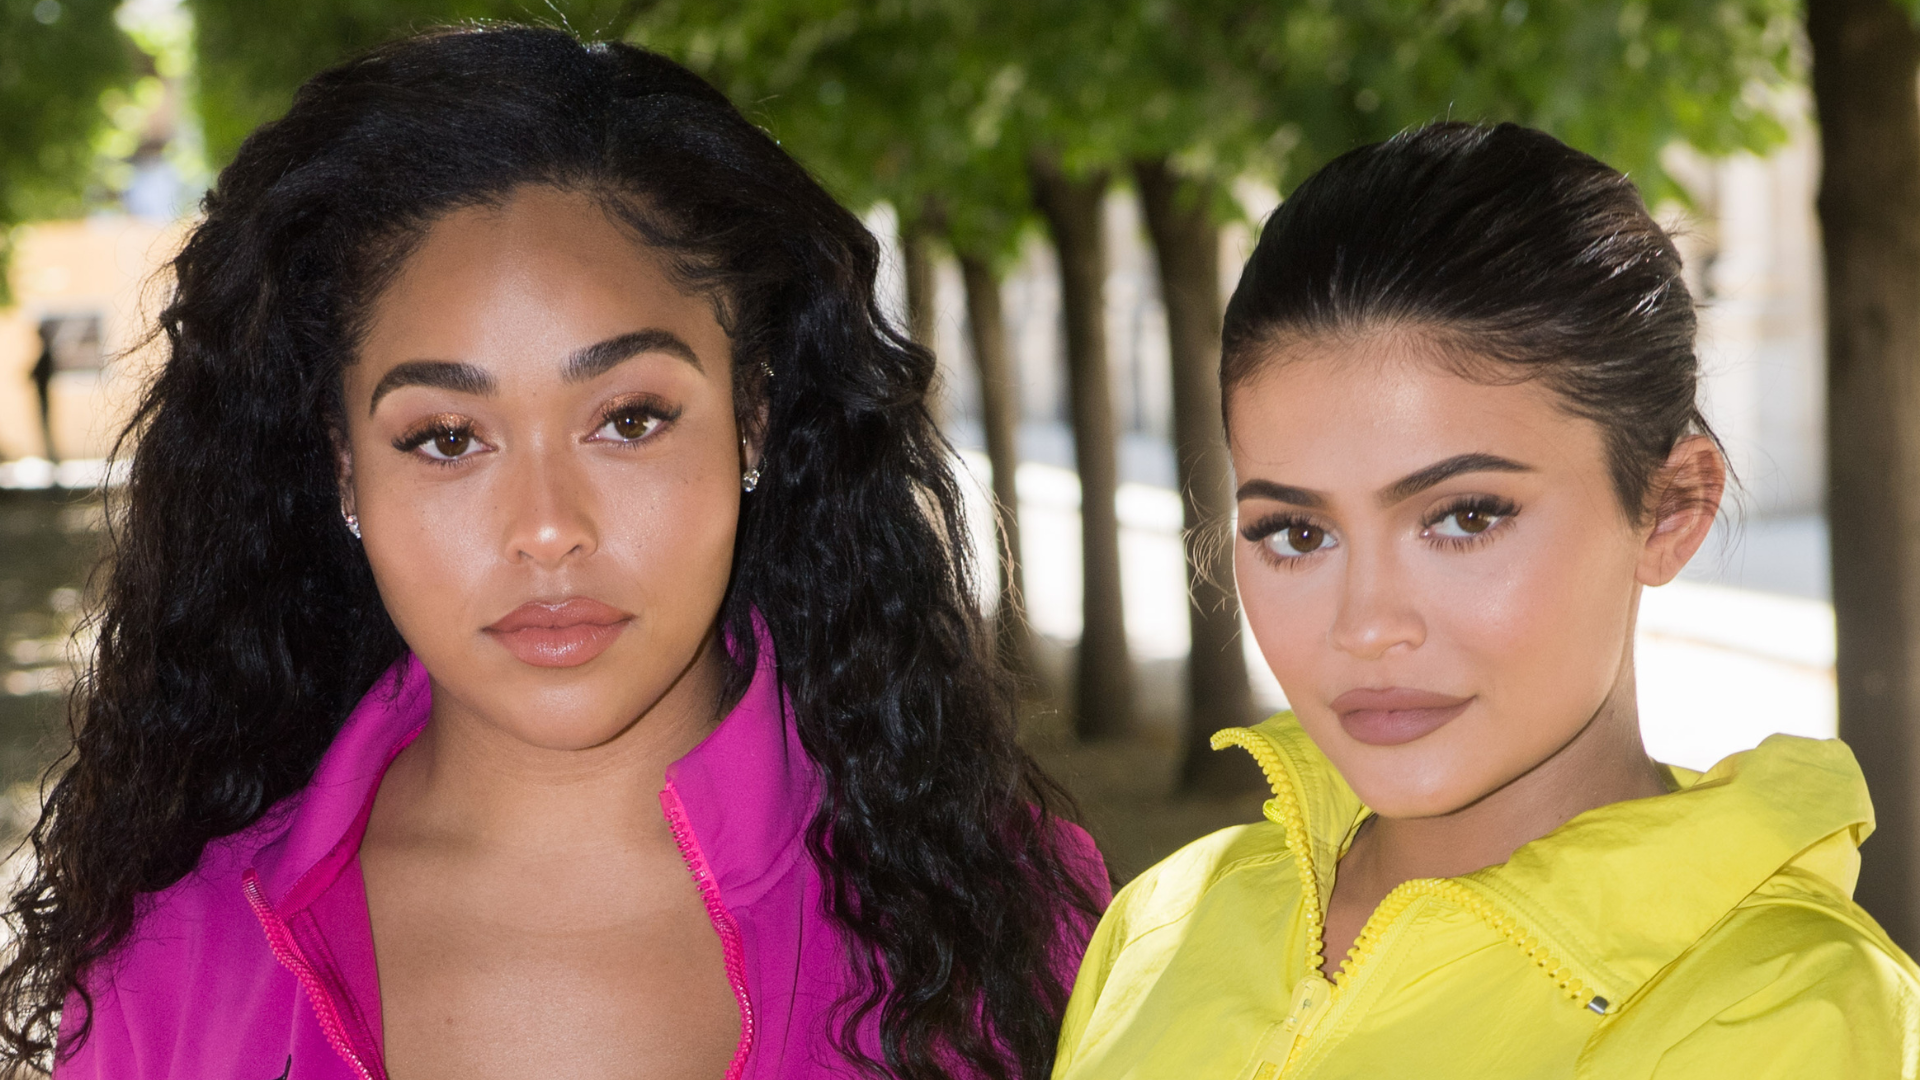 Jordyn Woods Reportedly Apologized to Kylie Jenner Before Reunion